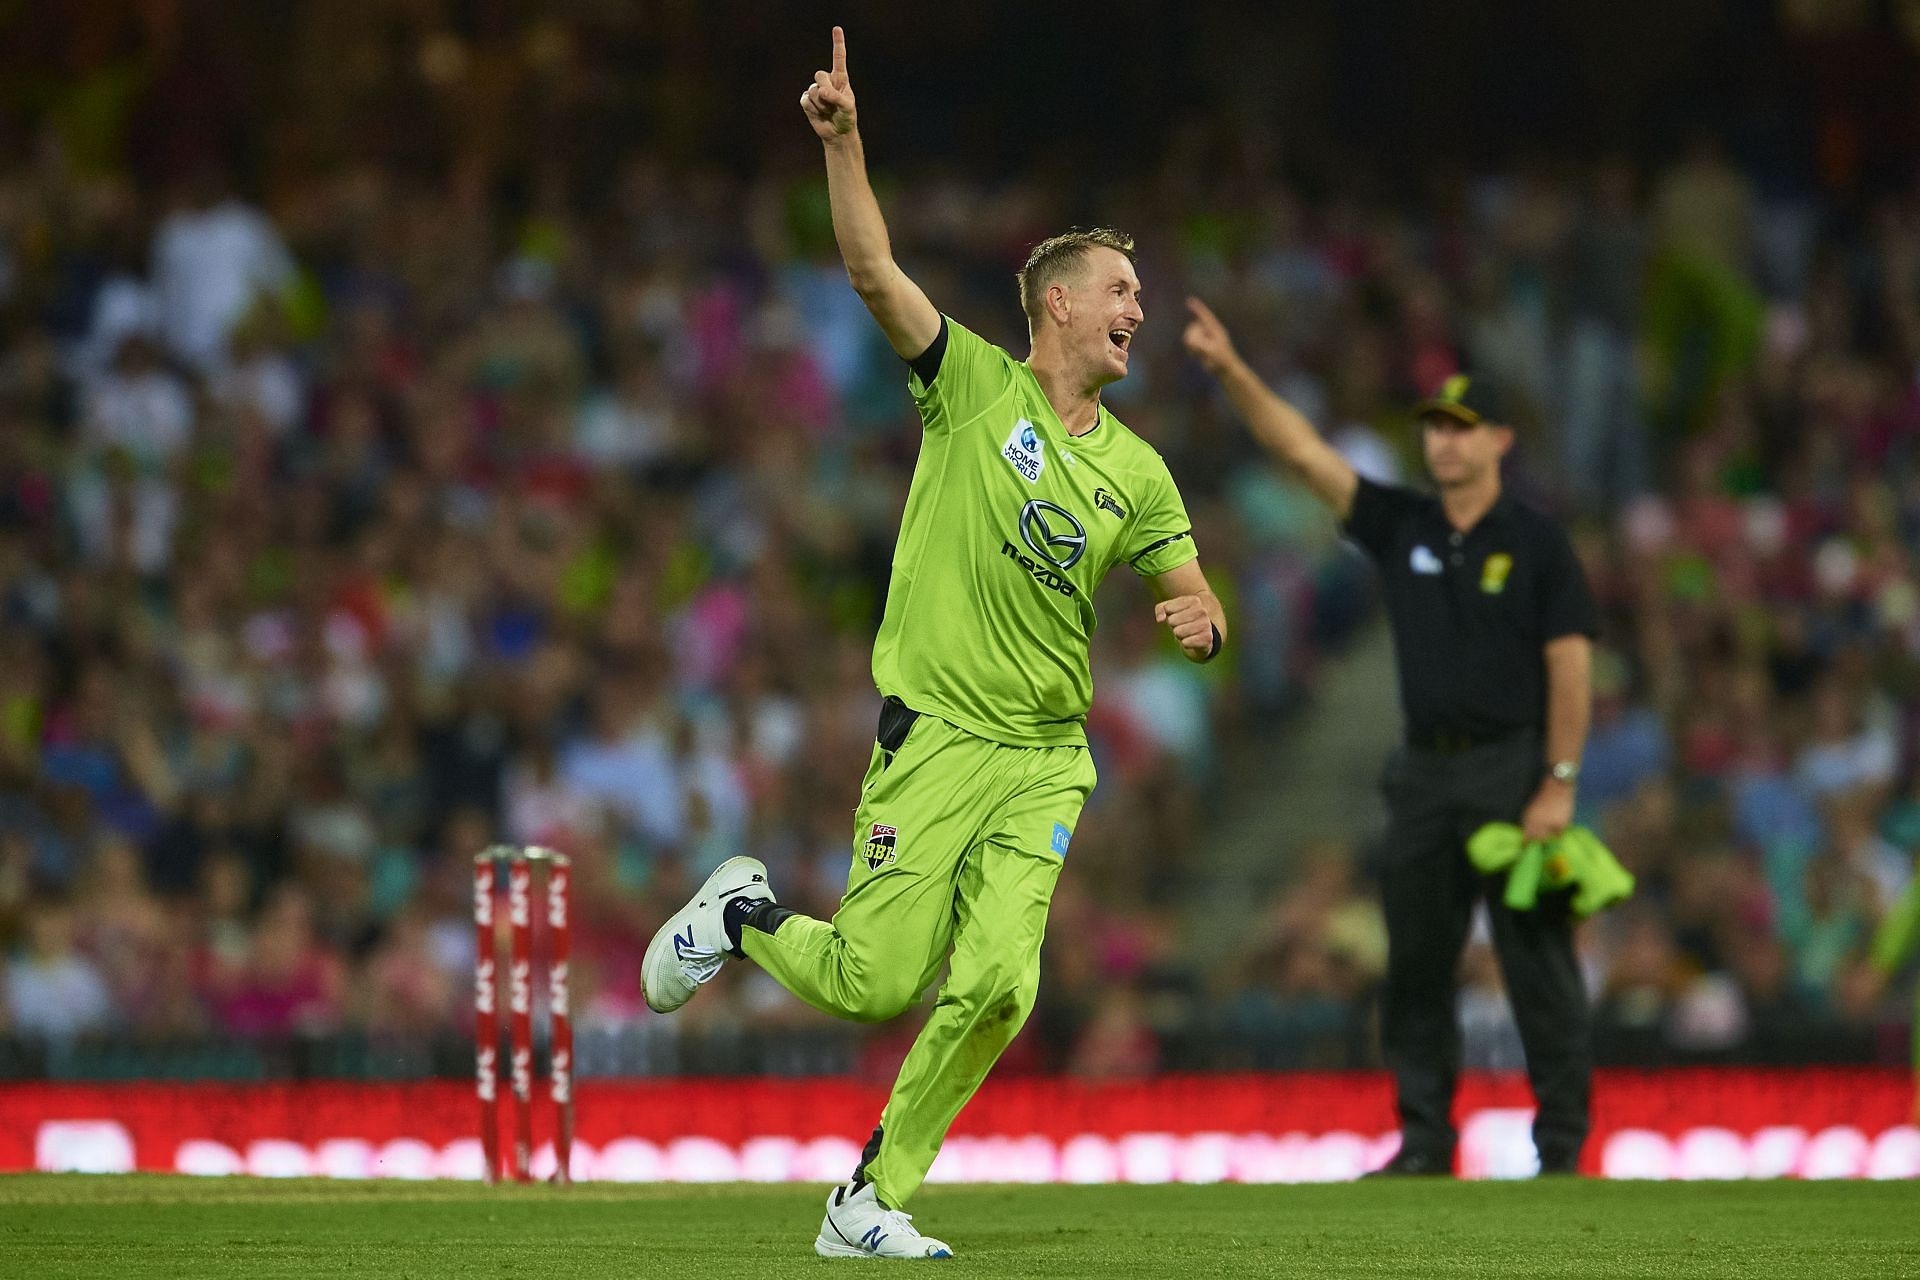 Chris Morris has been one of the best bowling lynchpins in T20 cricket.